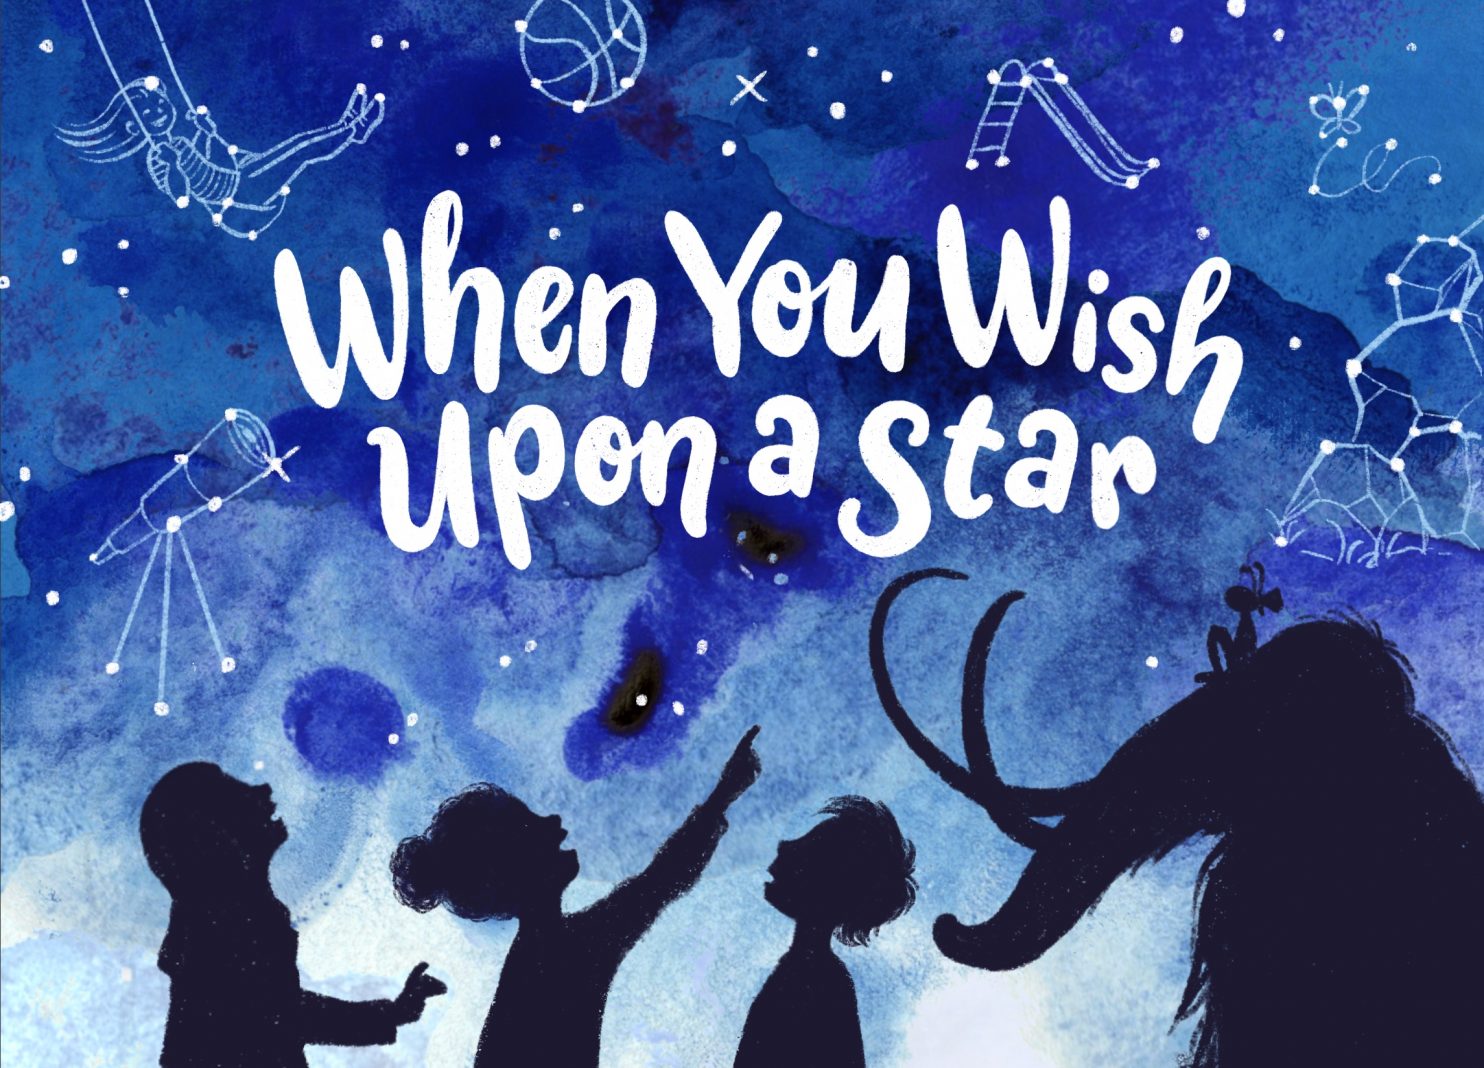 When You Wish Upon a Star illustration, featuring children looking up into a starry night sky and seeing play yard elements -- a climbing wall, swings, basketball, and more.